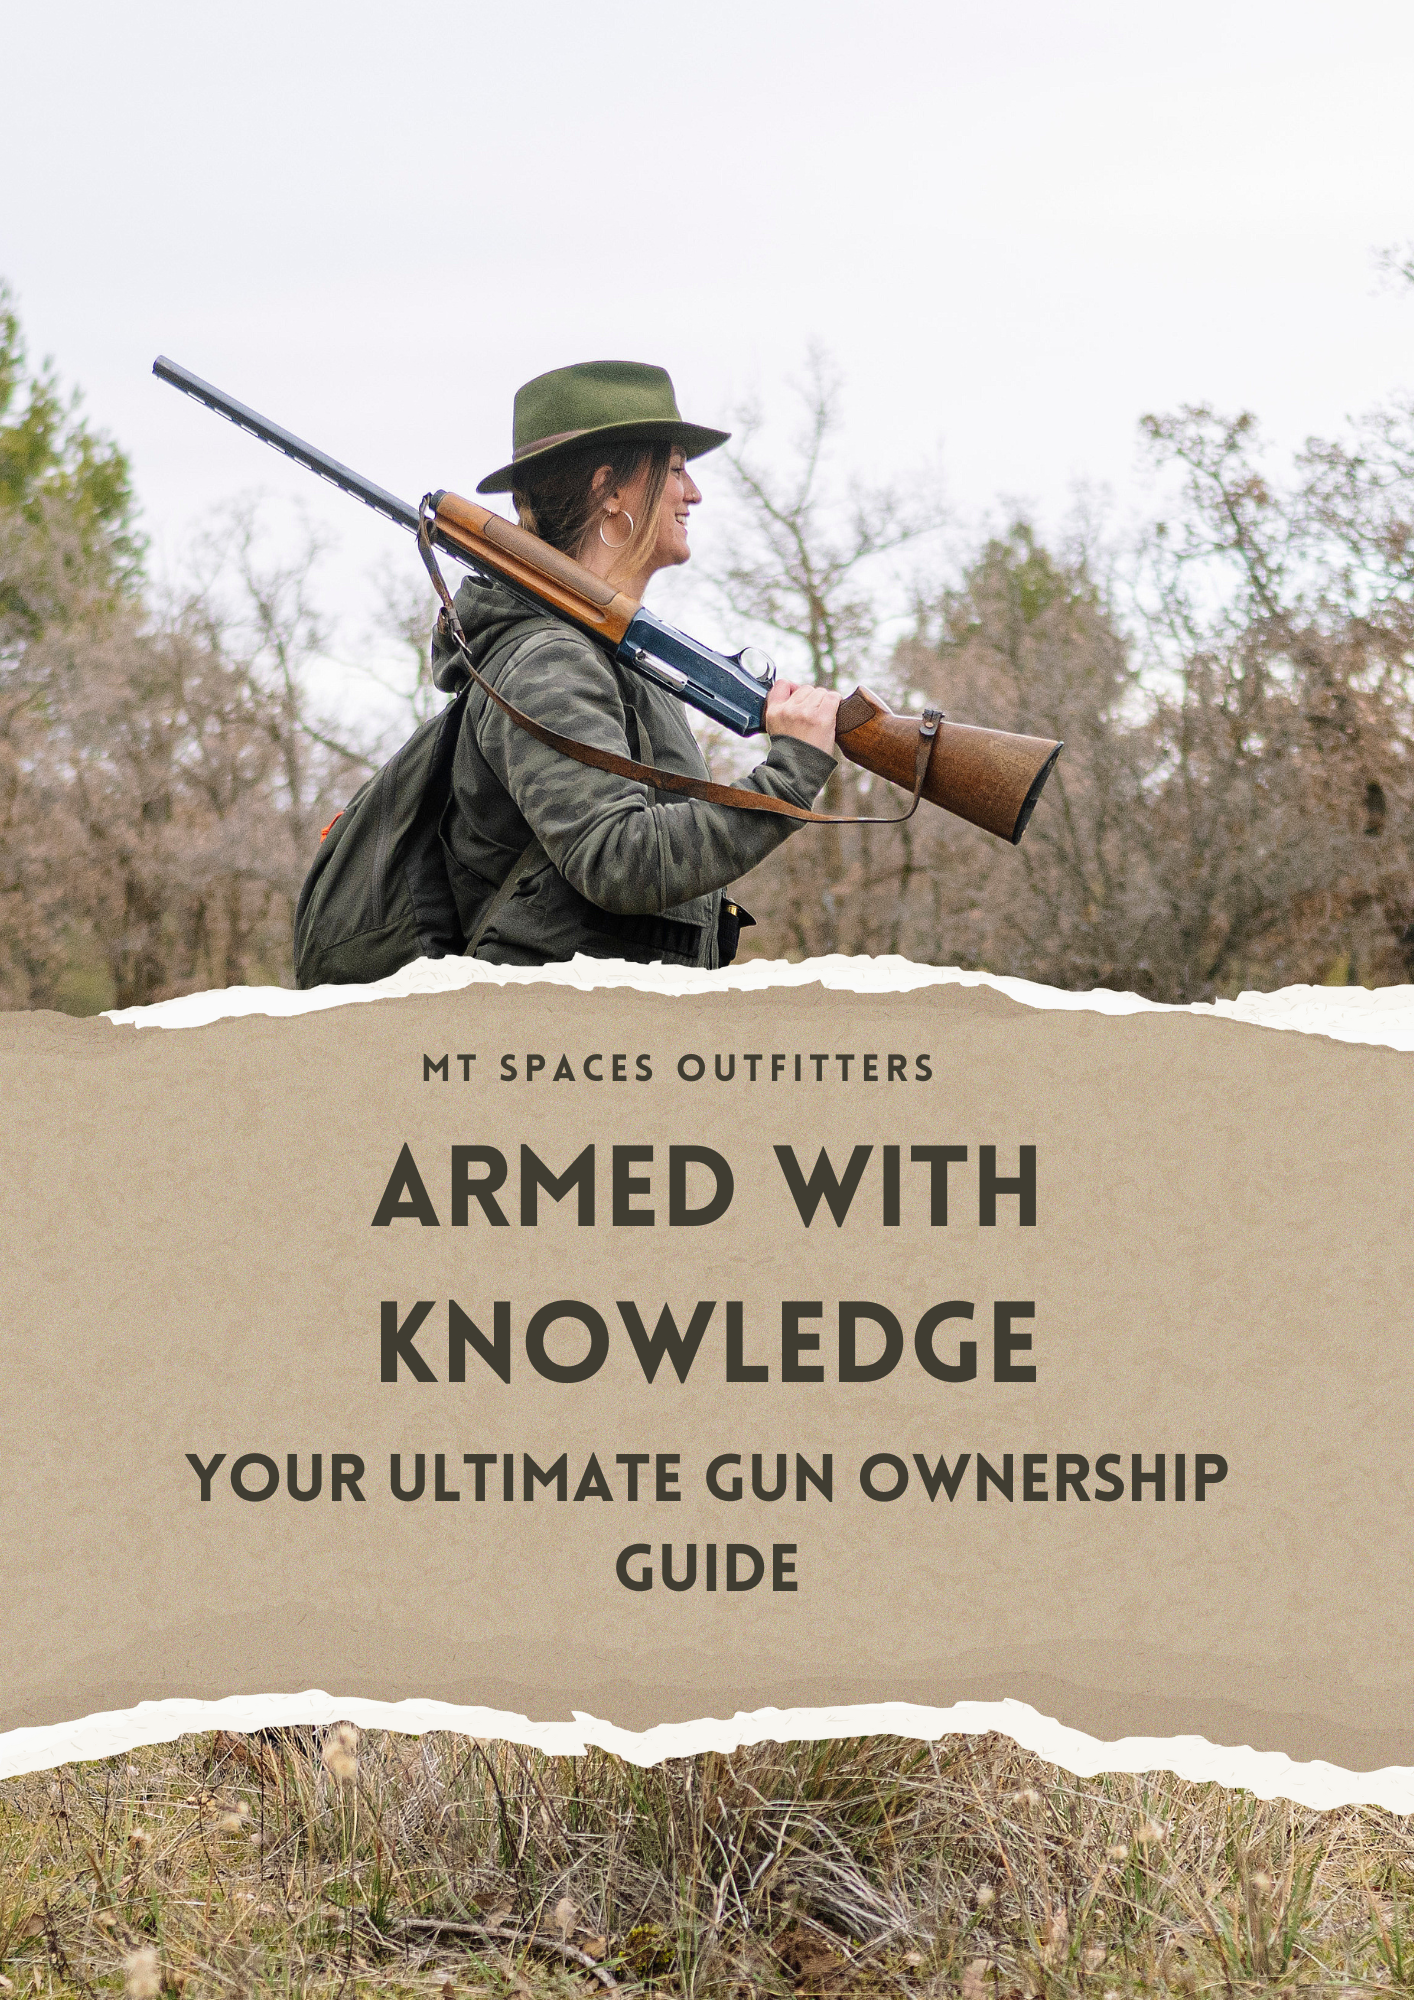 Armed With Knowledge - MT Spaces Outfitters